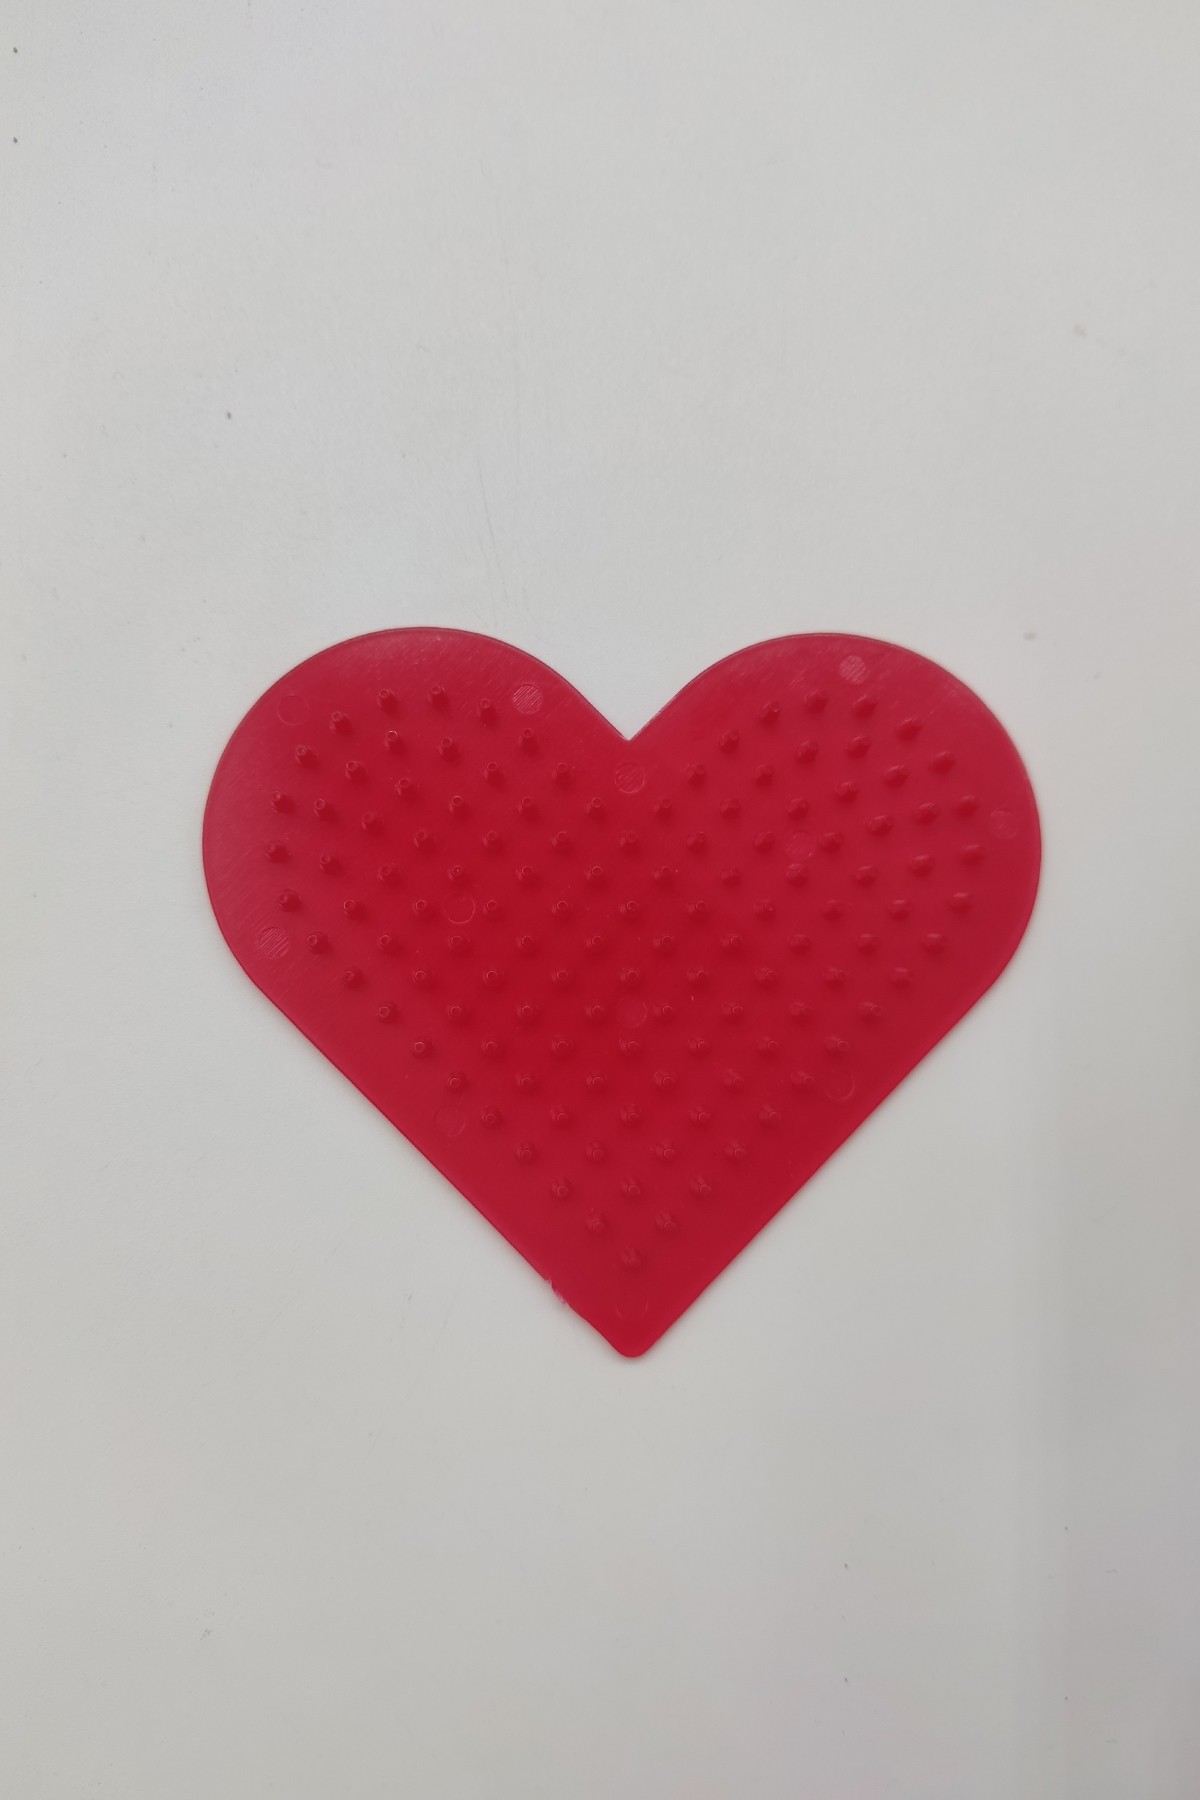 Pixel Pixel Pegboard For Beading Red Heart PPP16-08